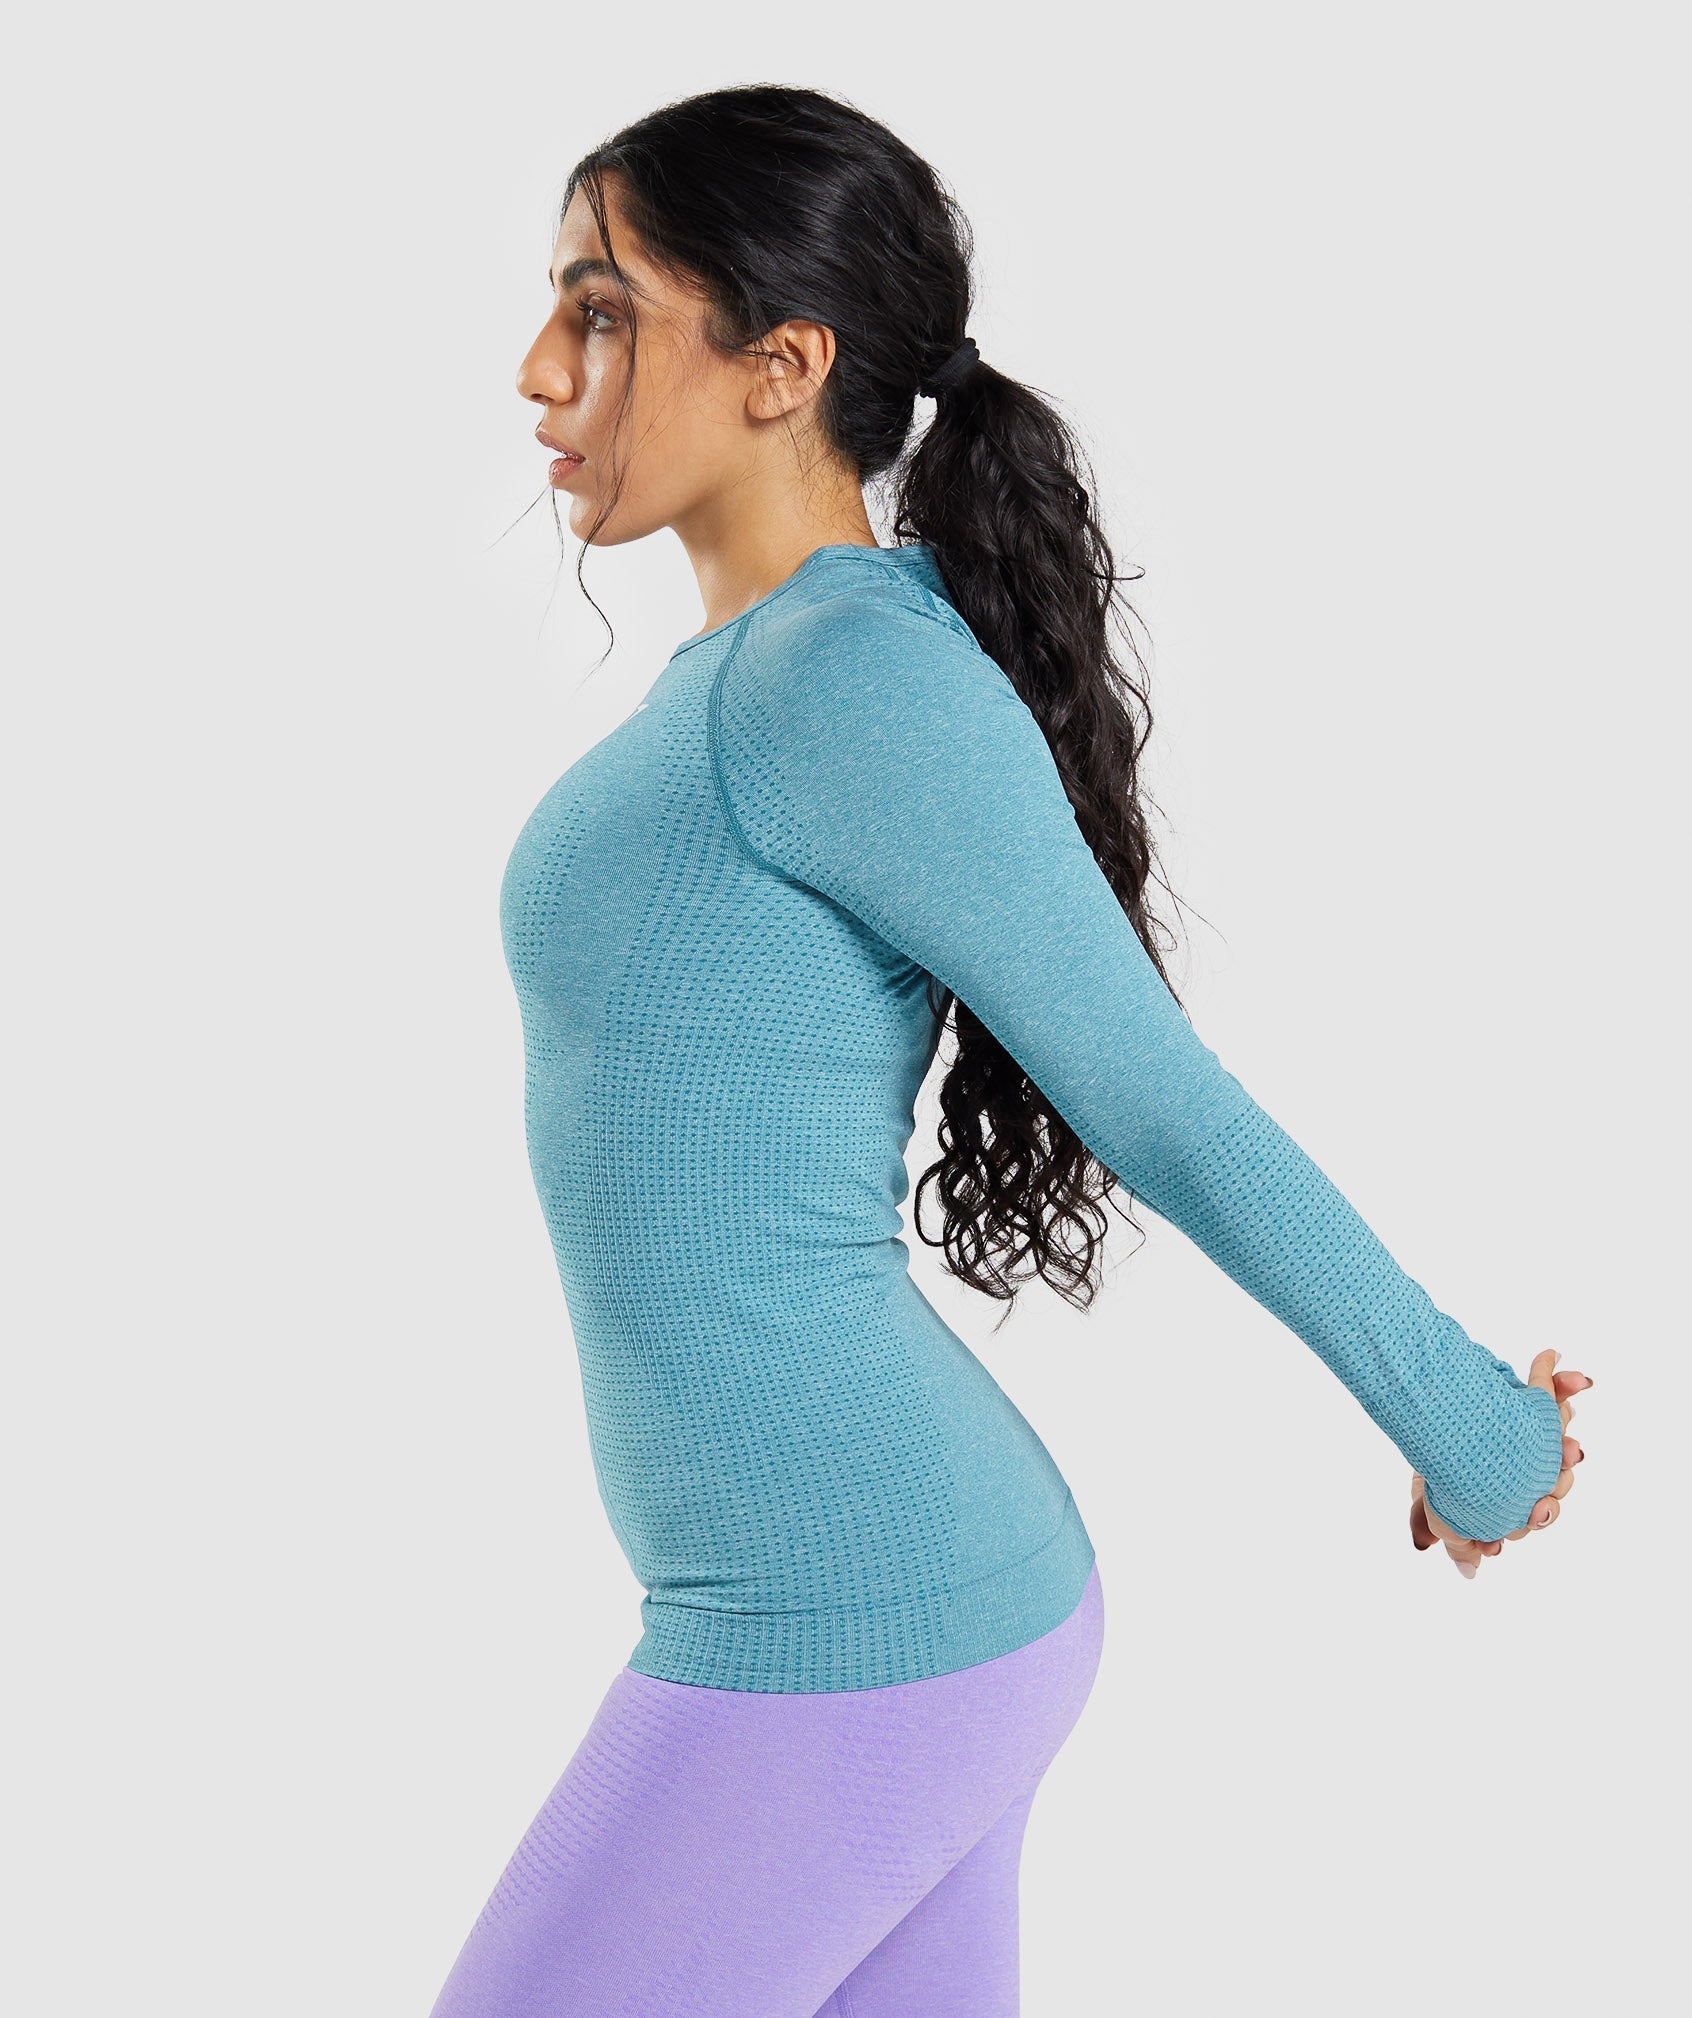 GapFit Motion Long Sleeve Tee Athletic Activewear Workout Comfy Medium -  $20 - From Charelle